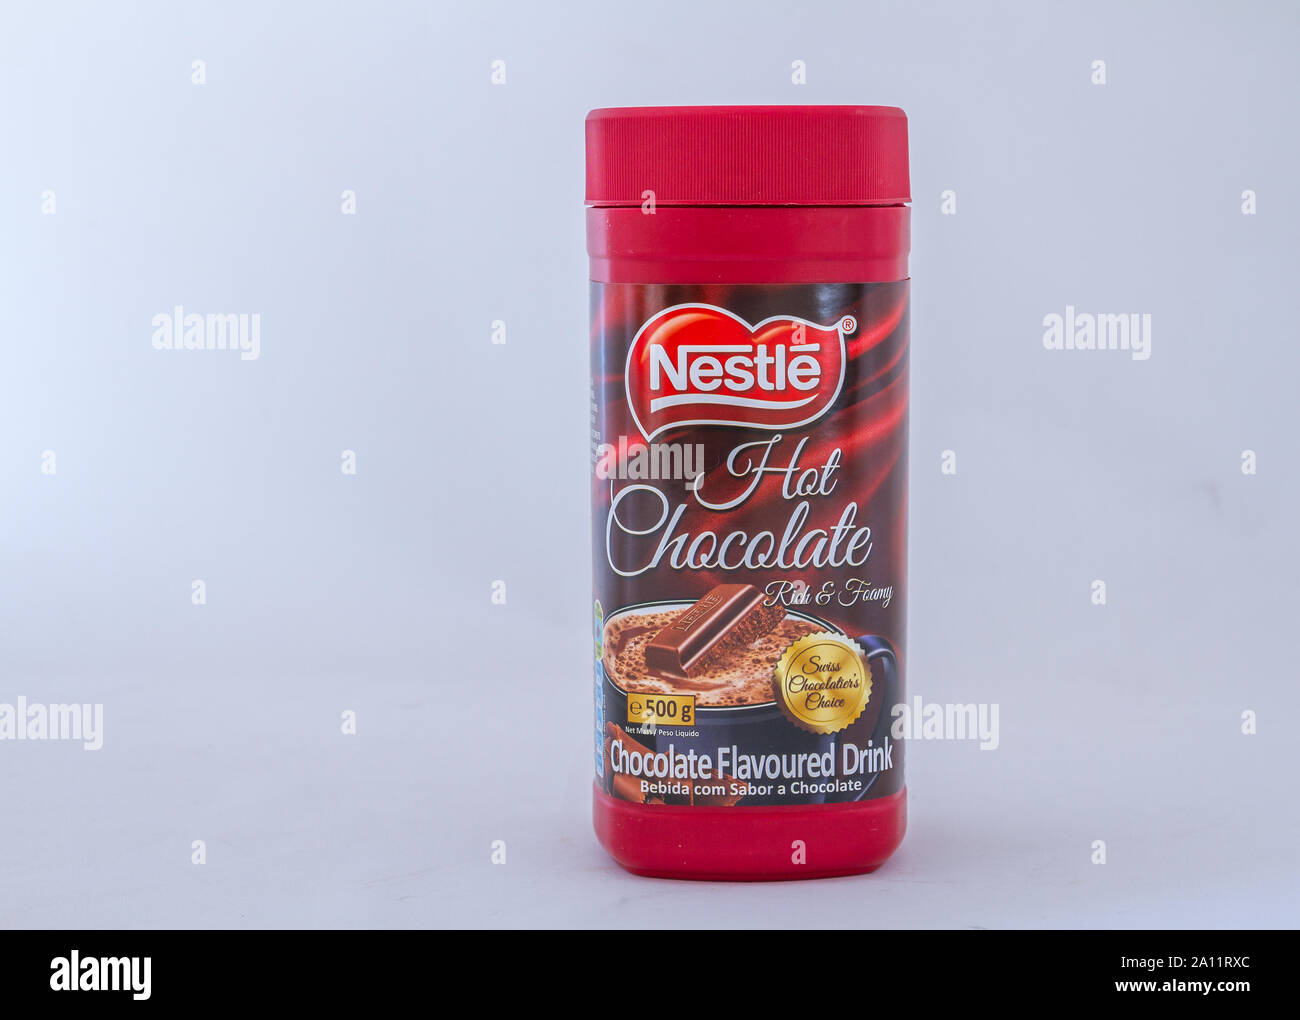 https://c8.alamy.com/comp/2A11RXC/alberton-south-africa-a-container-of-nestle-hot-chocolate-isolated-on-a-white-background-image-with-copy-space-in-horizontal-format-2A11RXC.jpg